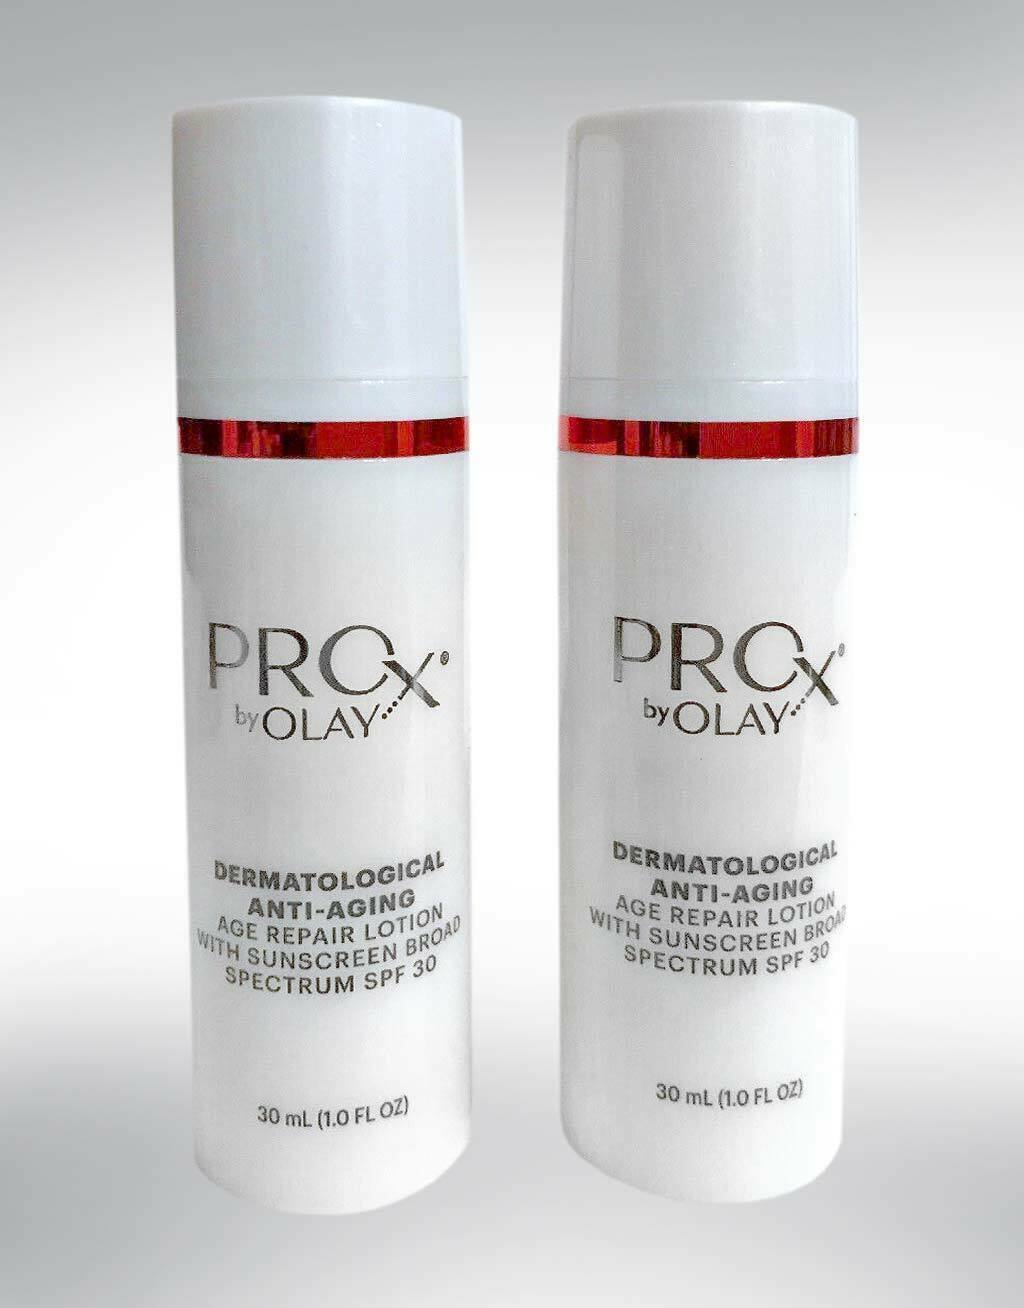 (2) OLAY ProX Dermatological Anti-Aging AGE REPAIR LOTION SPF 30 (1oz) UNBOXED